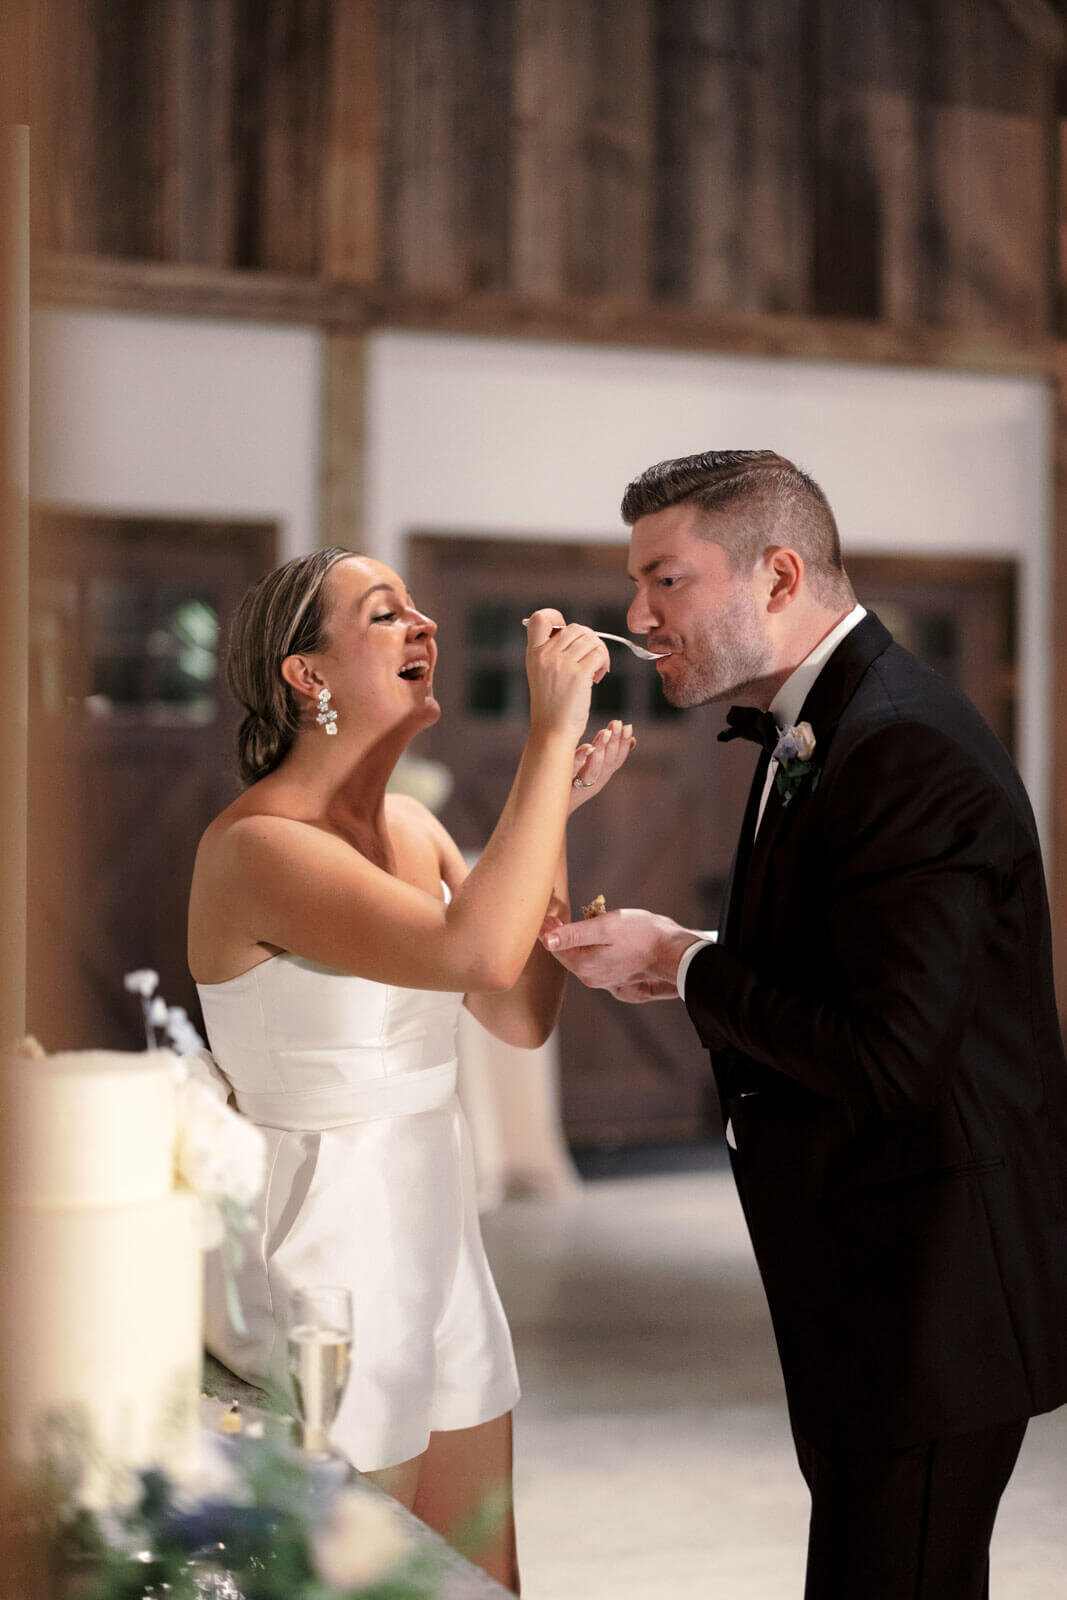 The bride is happily feeding a mouthful of cake to the groom at the wedding reception at Lion Rock Farm, CT. Image by Jenny Fu